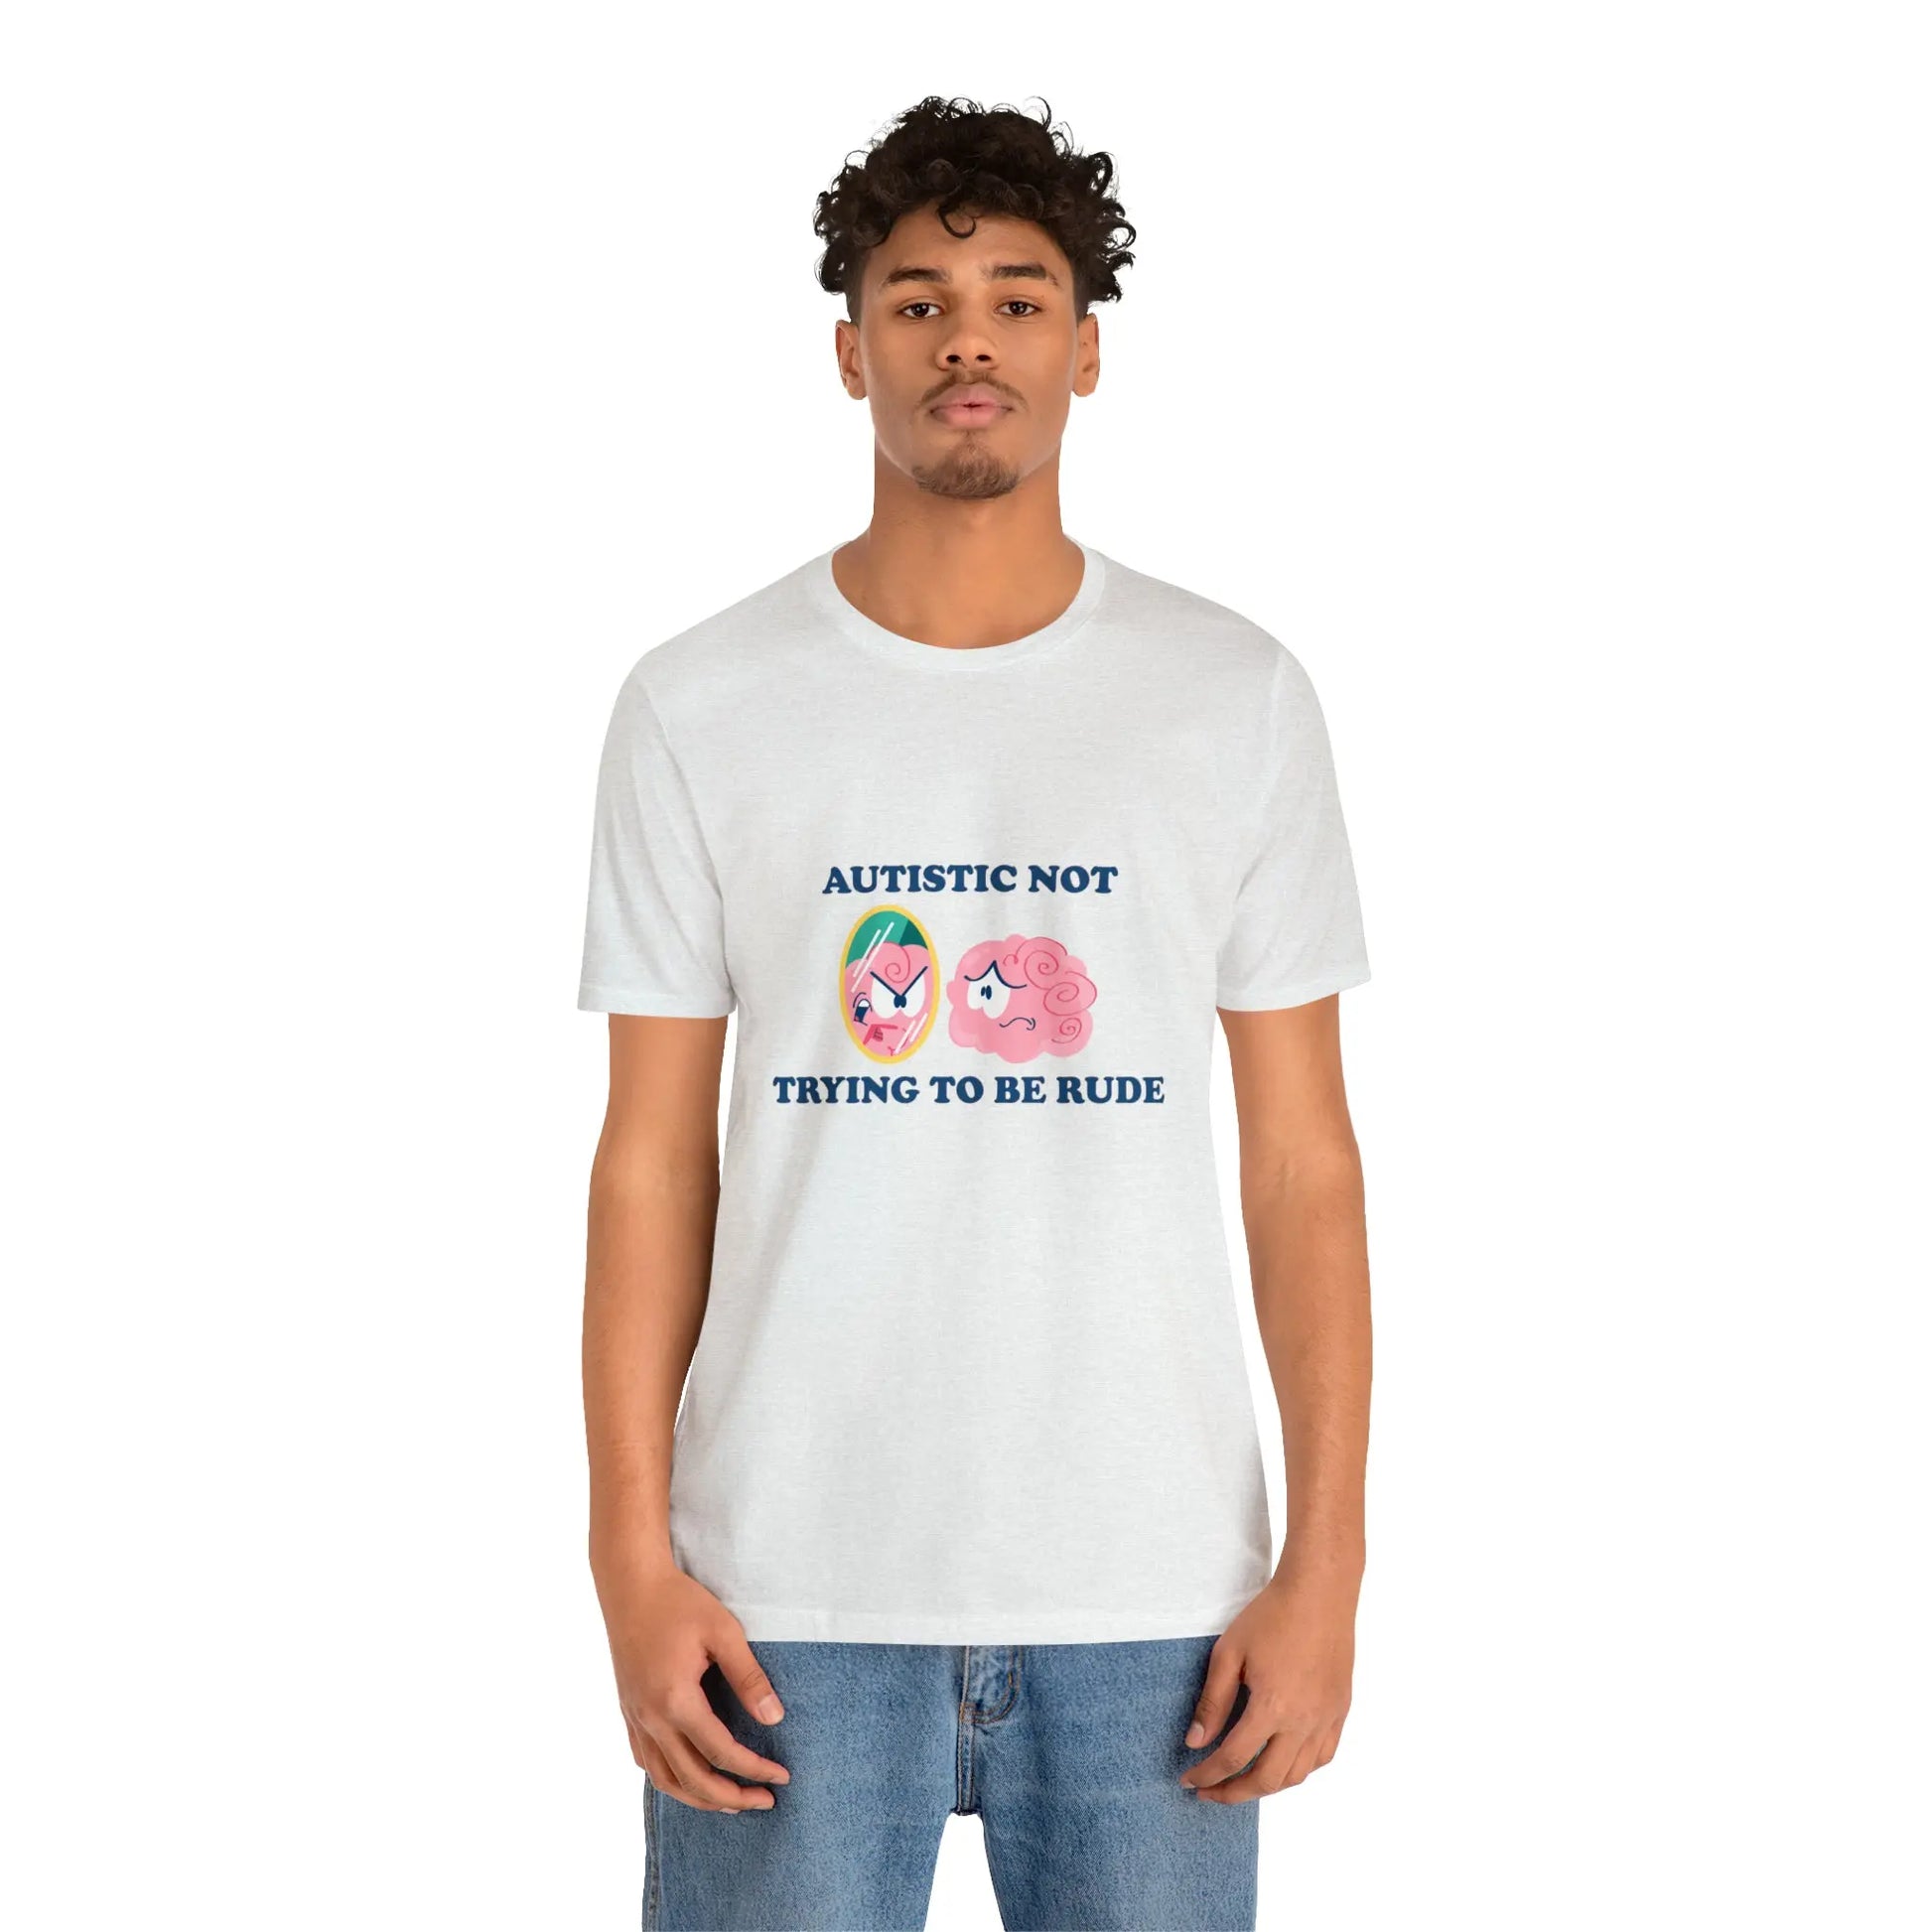 Autistic, Not Trying to be Rude T-Shirt - heyasd.com